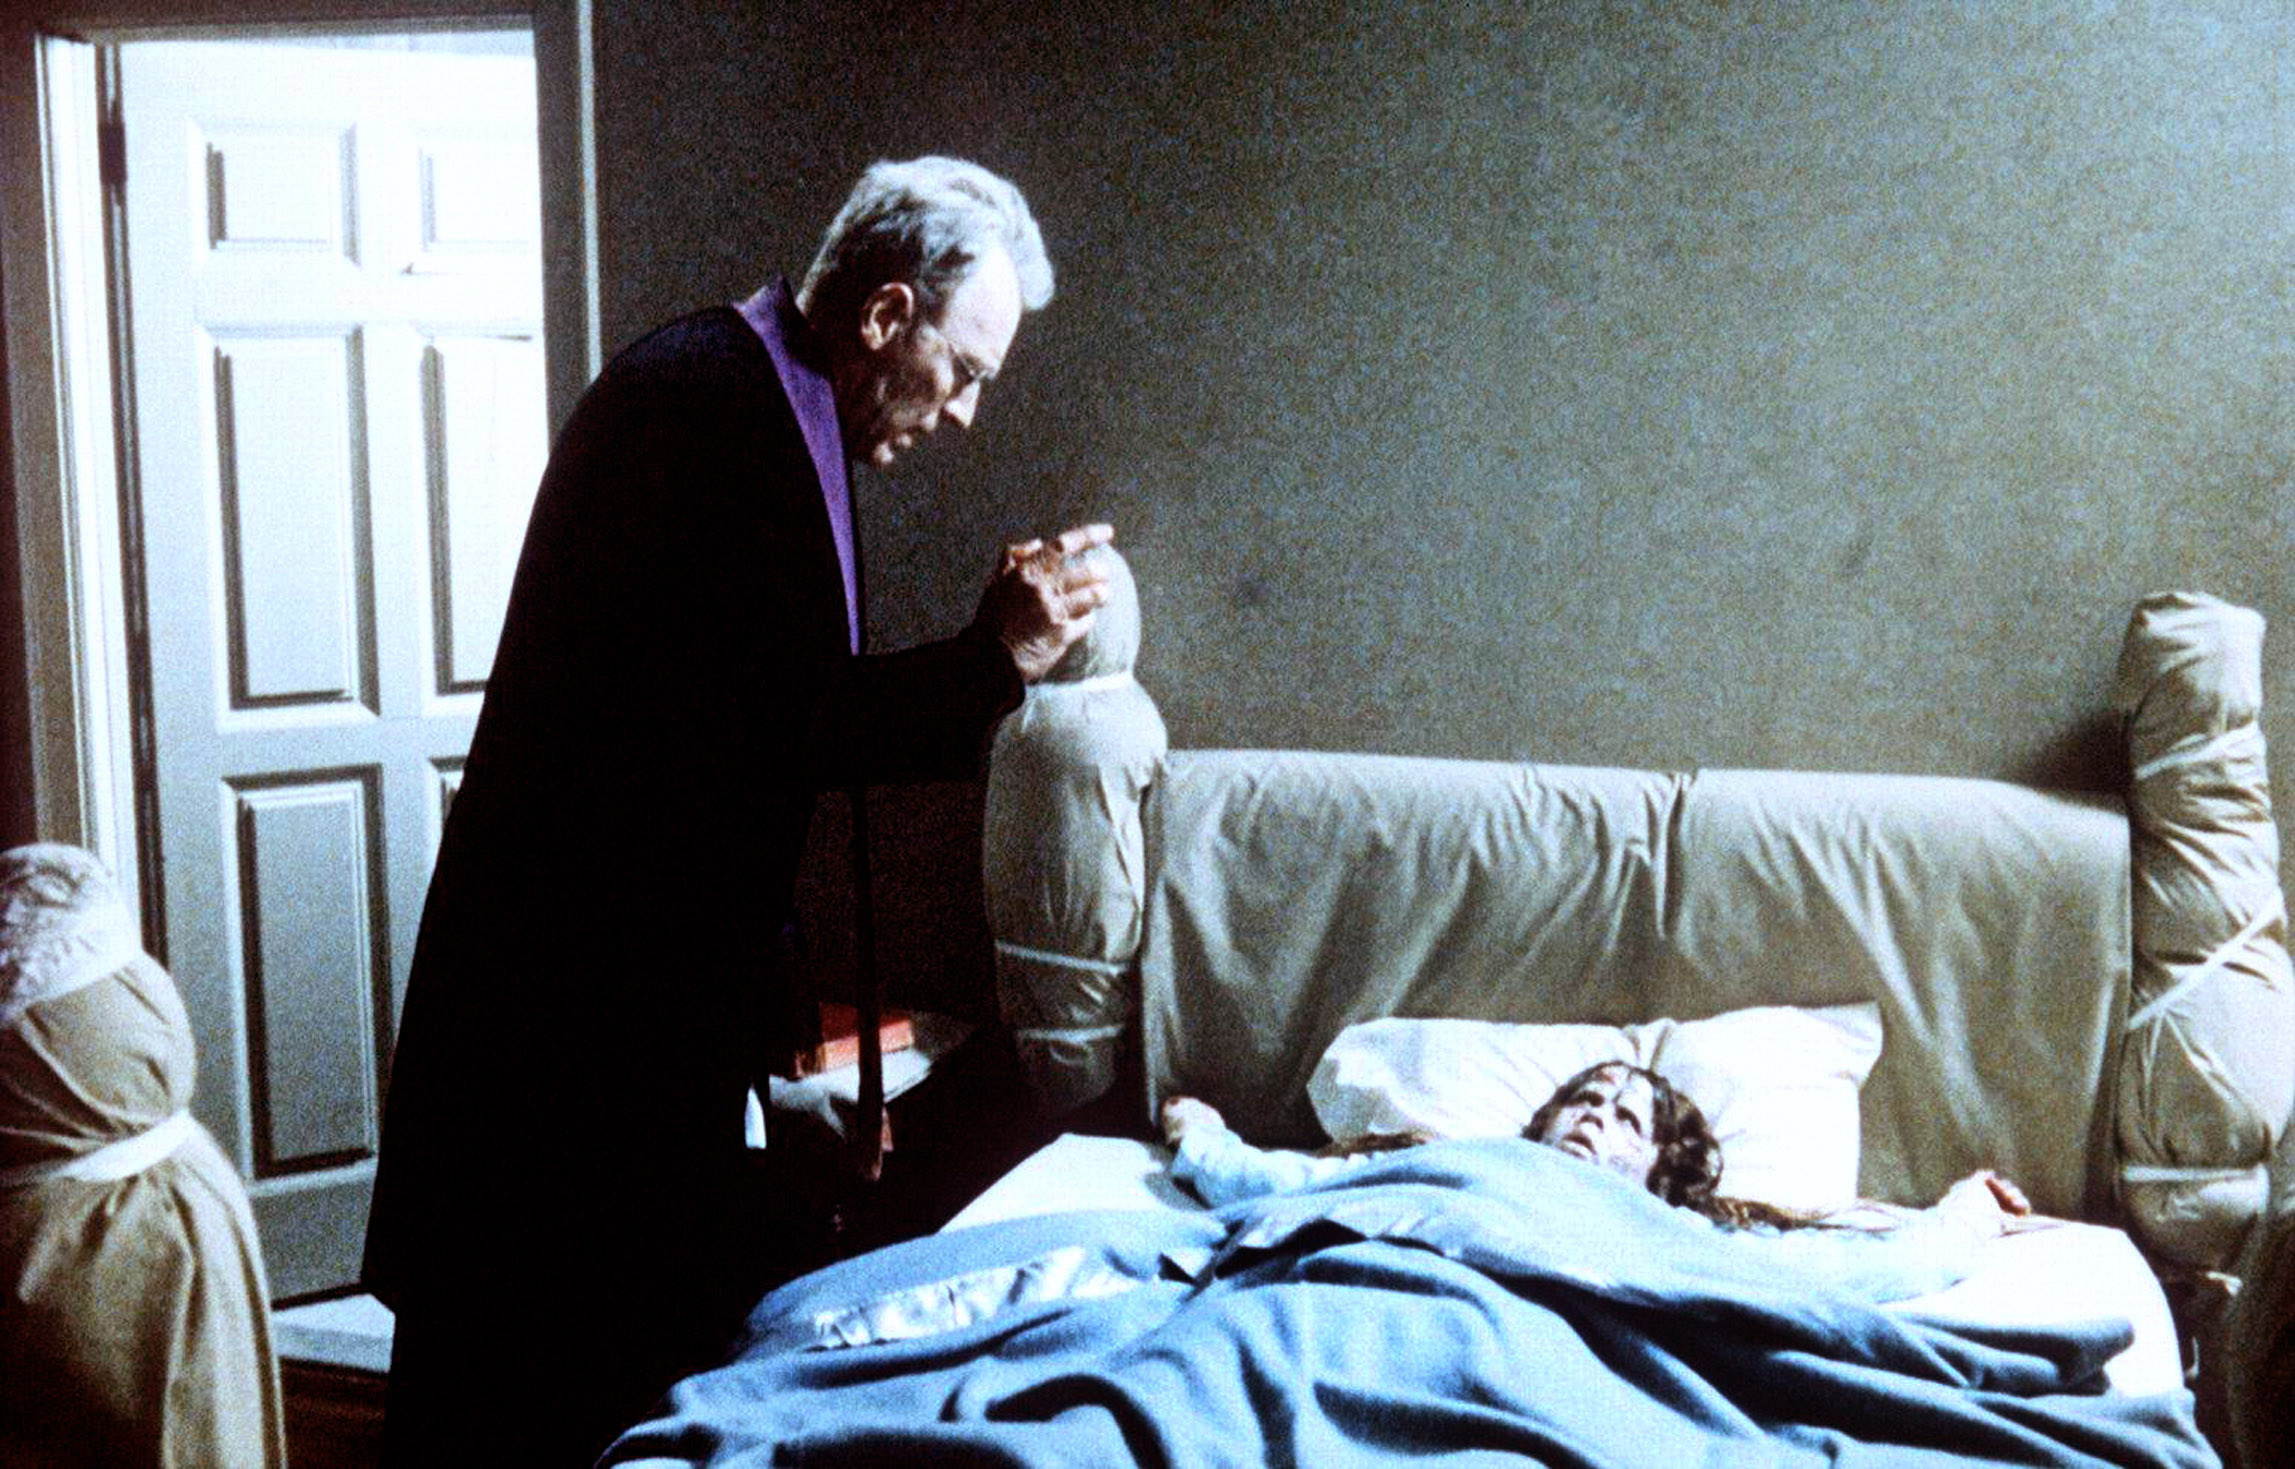 A priest stands over a young girl in bed